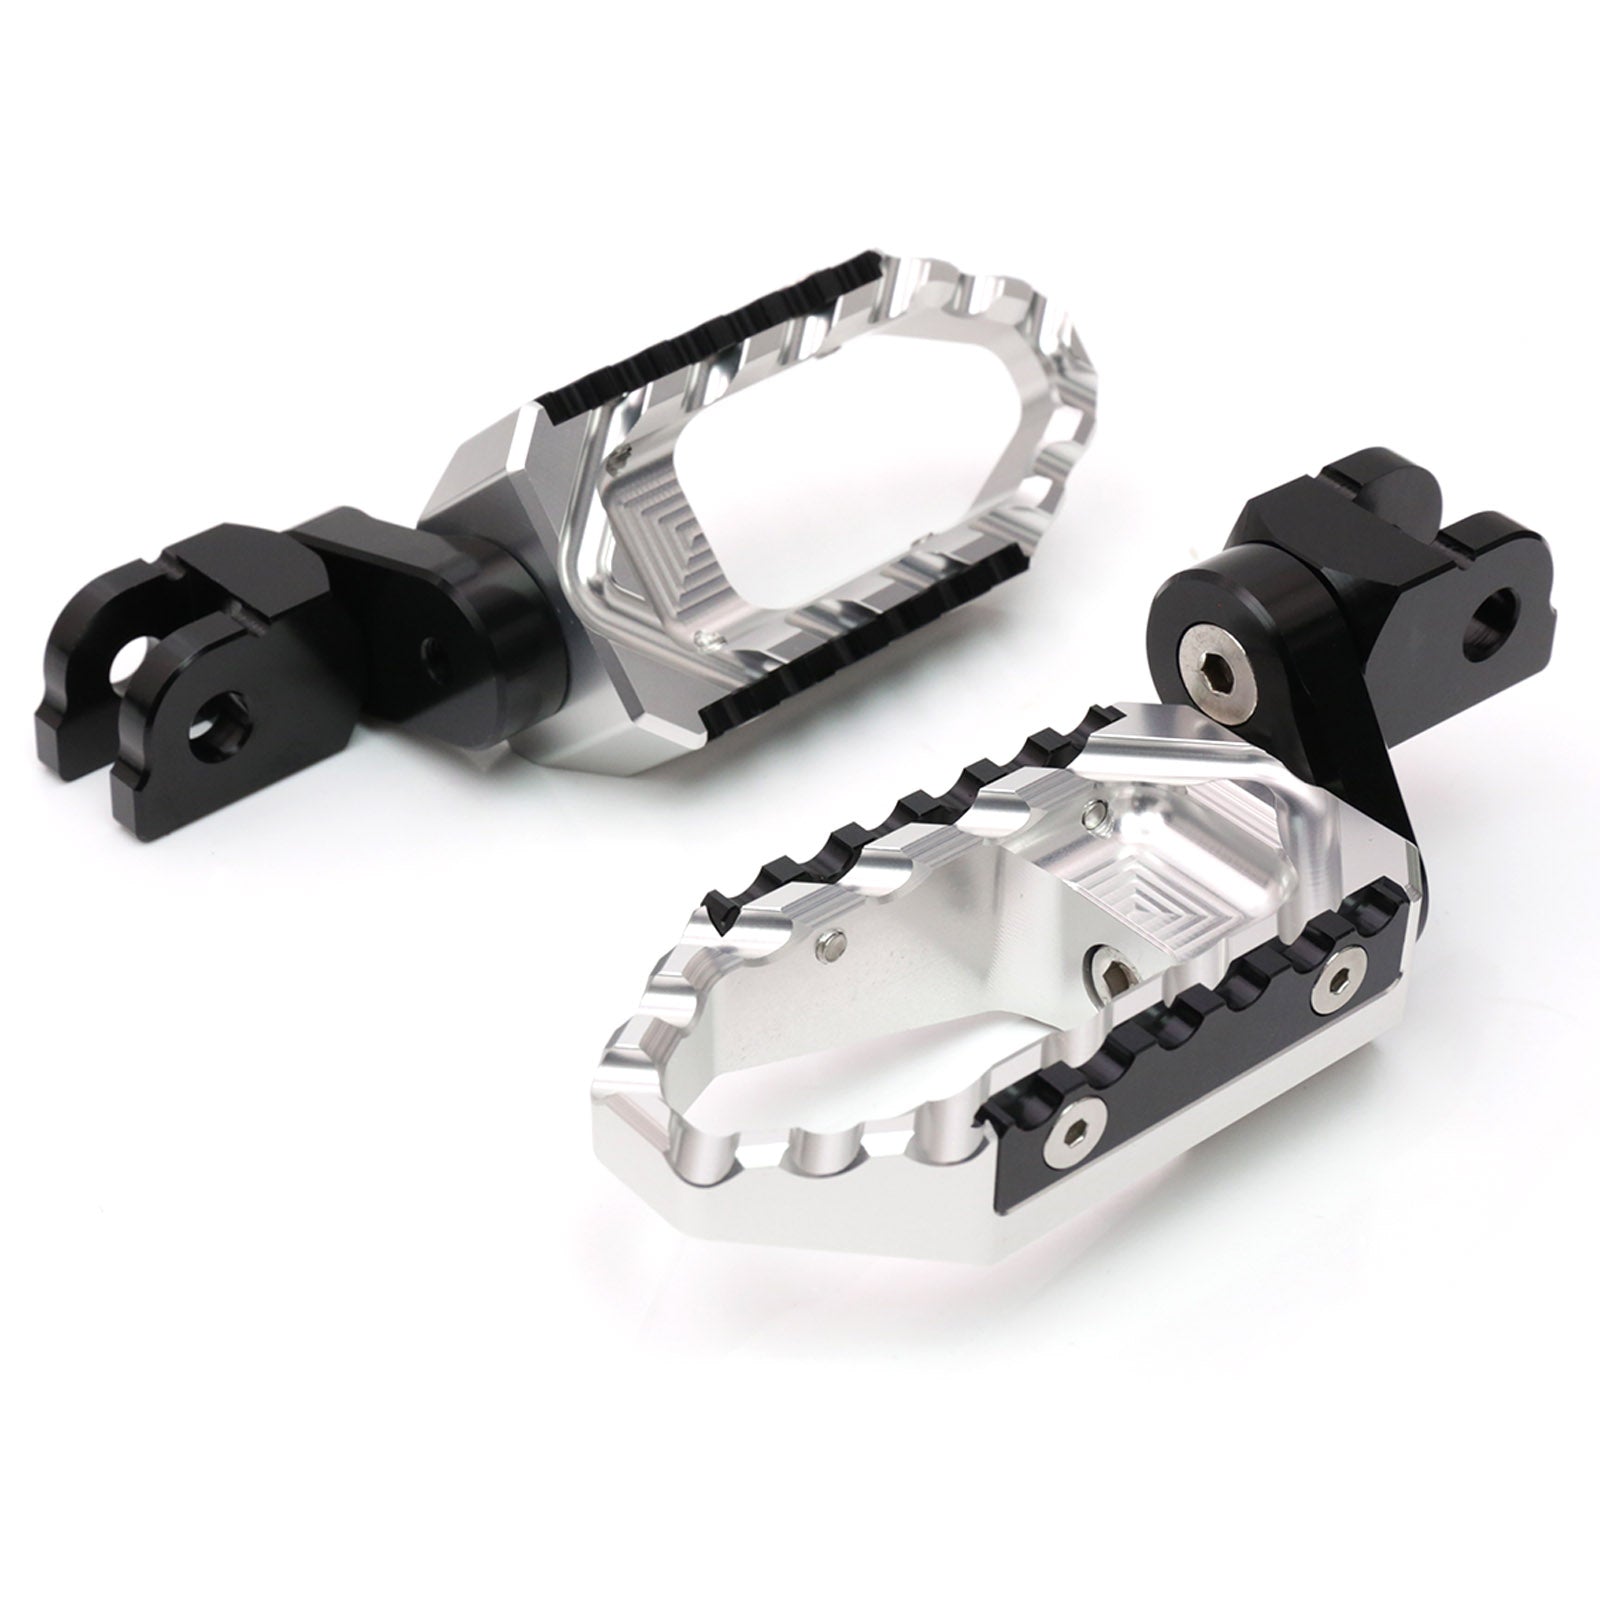 {Front} Fits Yamaha XSR 900 XJR1300 TRC Touring 25mm Wide Foot Pegs